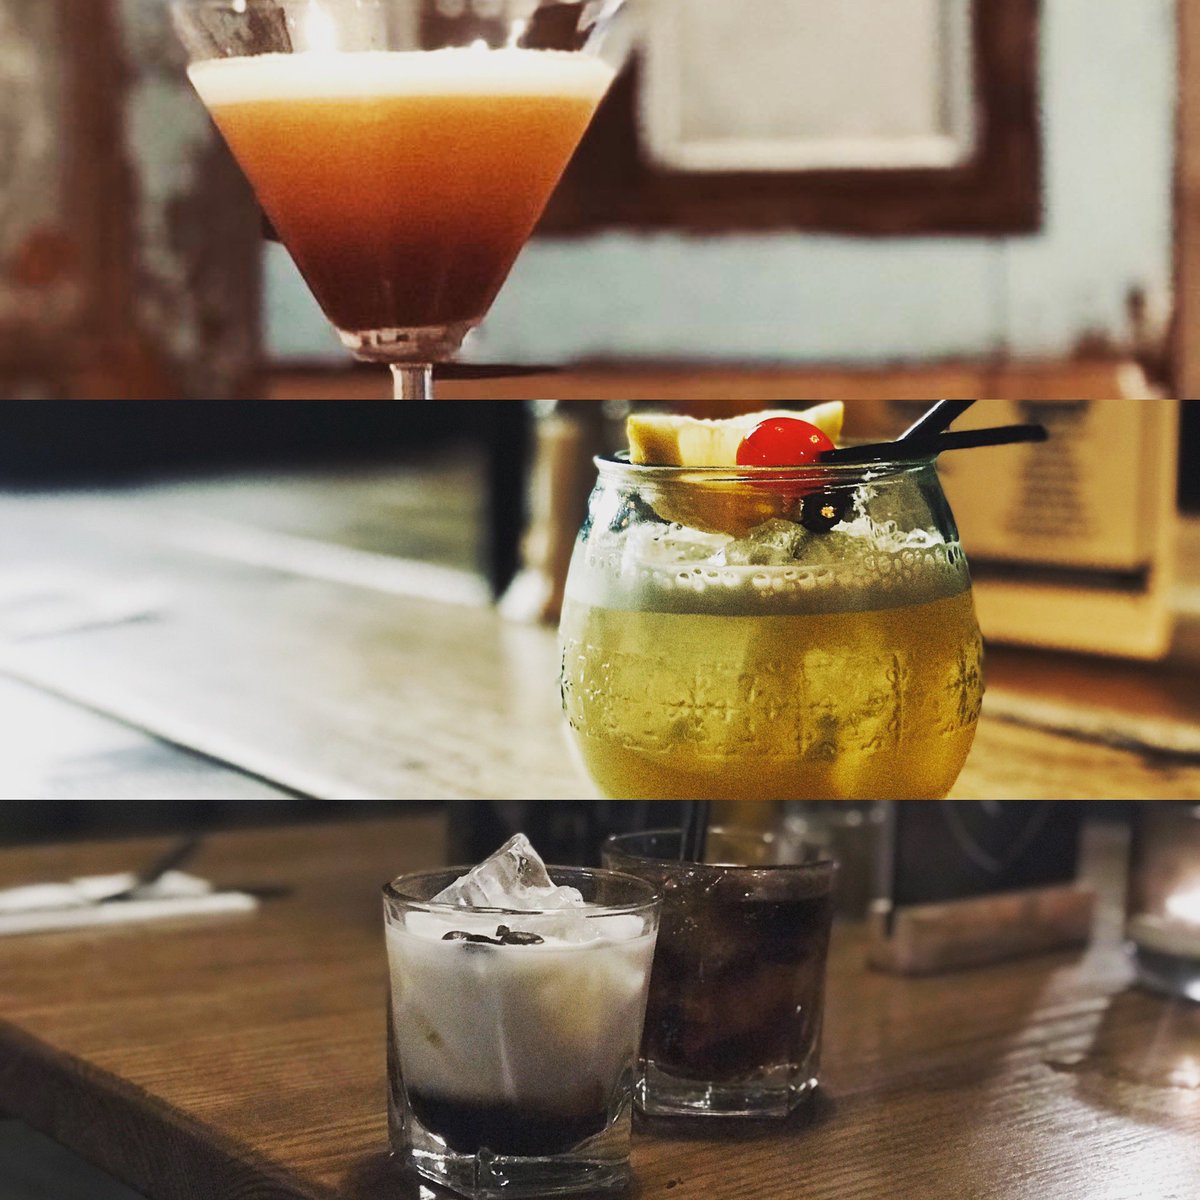 🚨🚨 241 WEEKEND 🚨🚨 - Another full weekend of 241 cocktails at The Exchange 🙌🍹🍸 All day Friday and Saturday! - #theexchange #theexchangestoke #cocktails #241 #deals #weekend #drinks #drinkstagram #drinksdrinksdrinks #cocktailsofinstagram #cocktail #cocktails🍸